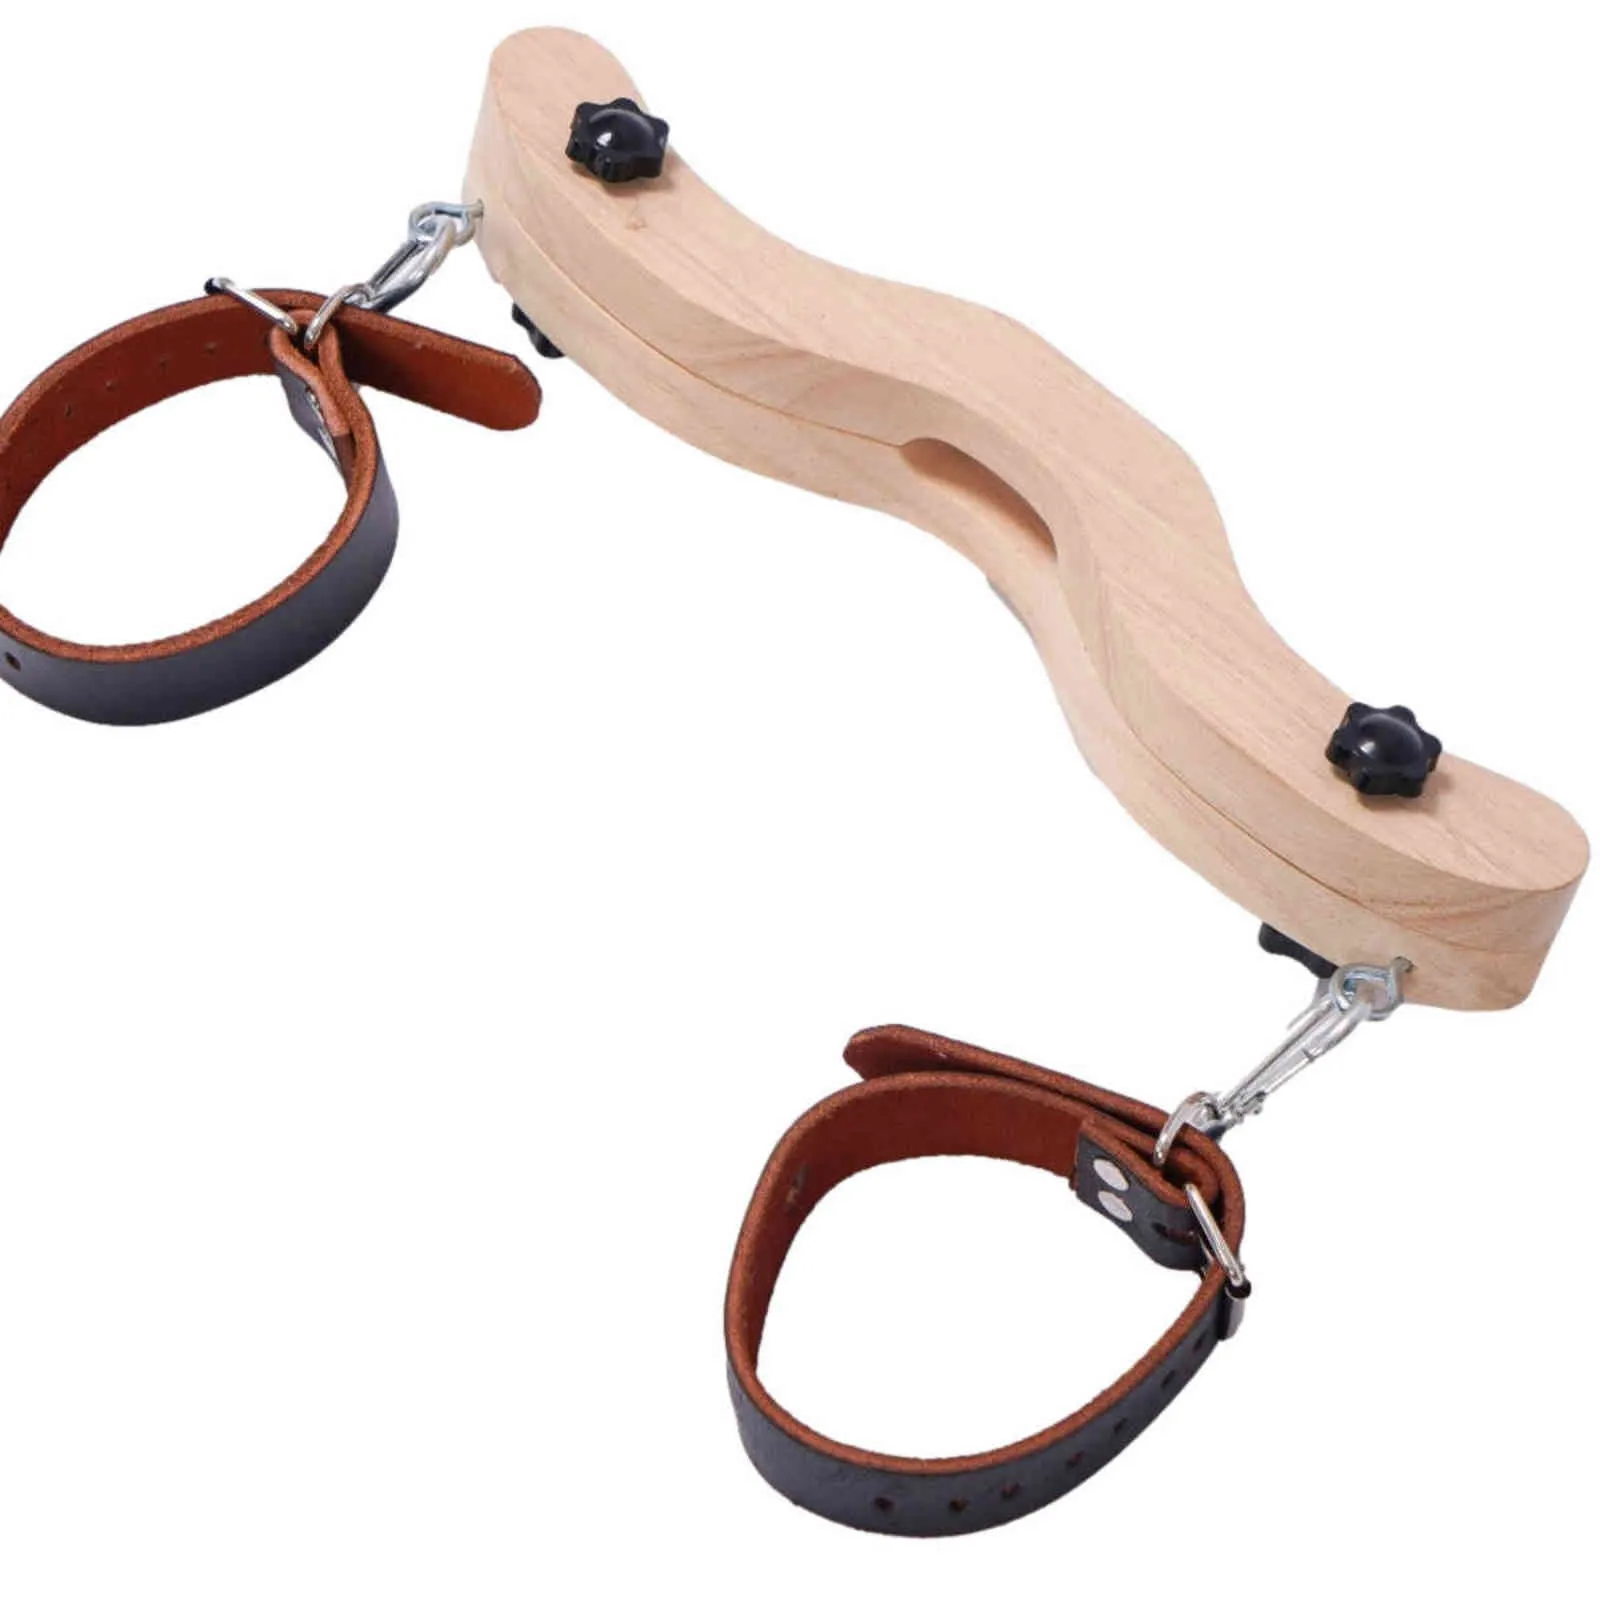 NXY Cockrings Black Wood BDSM Enforcer Humbler Set Cock & Ball Torture with Cuffs Sex Toy for Man Scrotal Fixture CBT Stretcher Smasher 1124